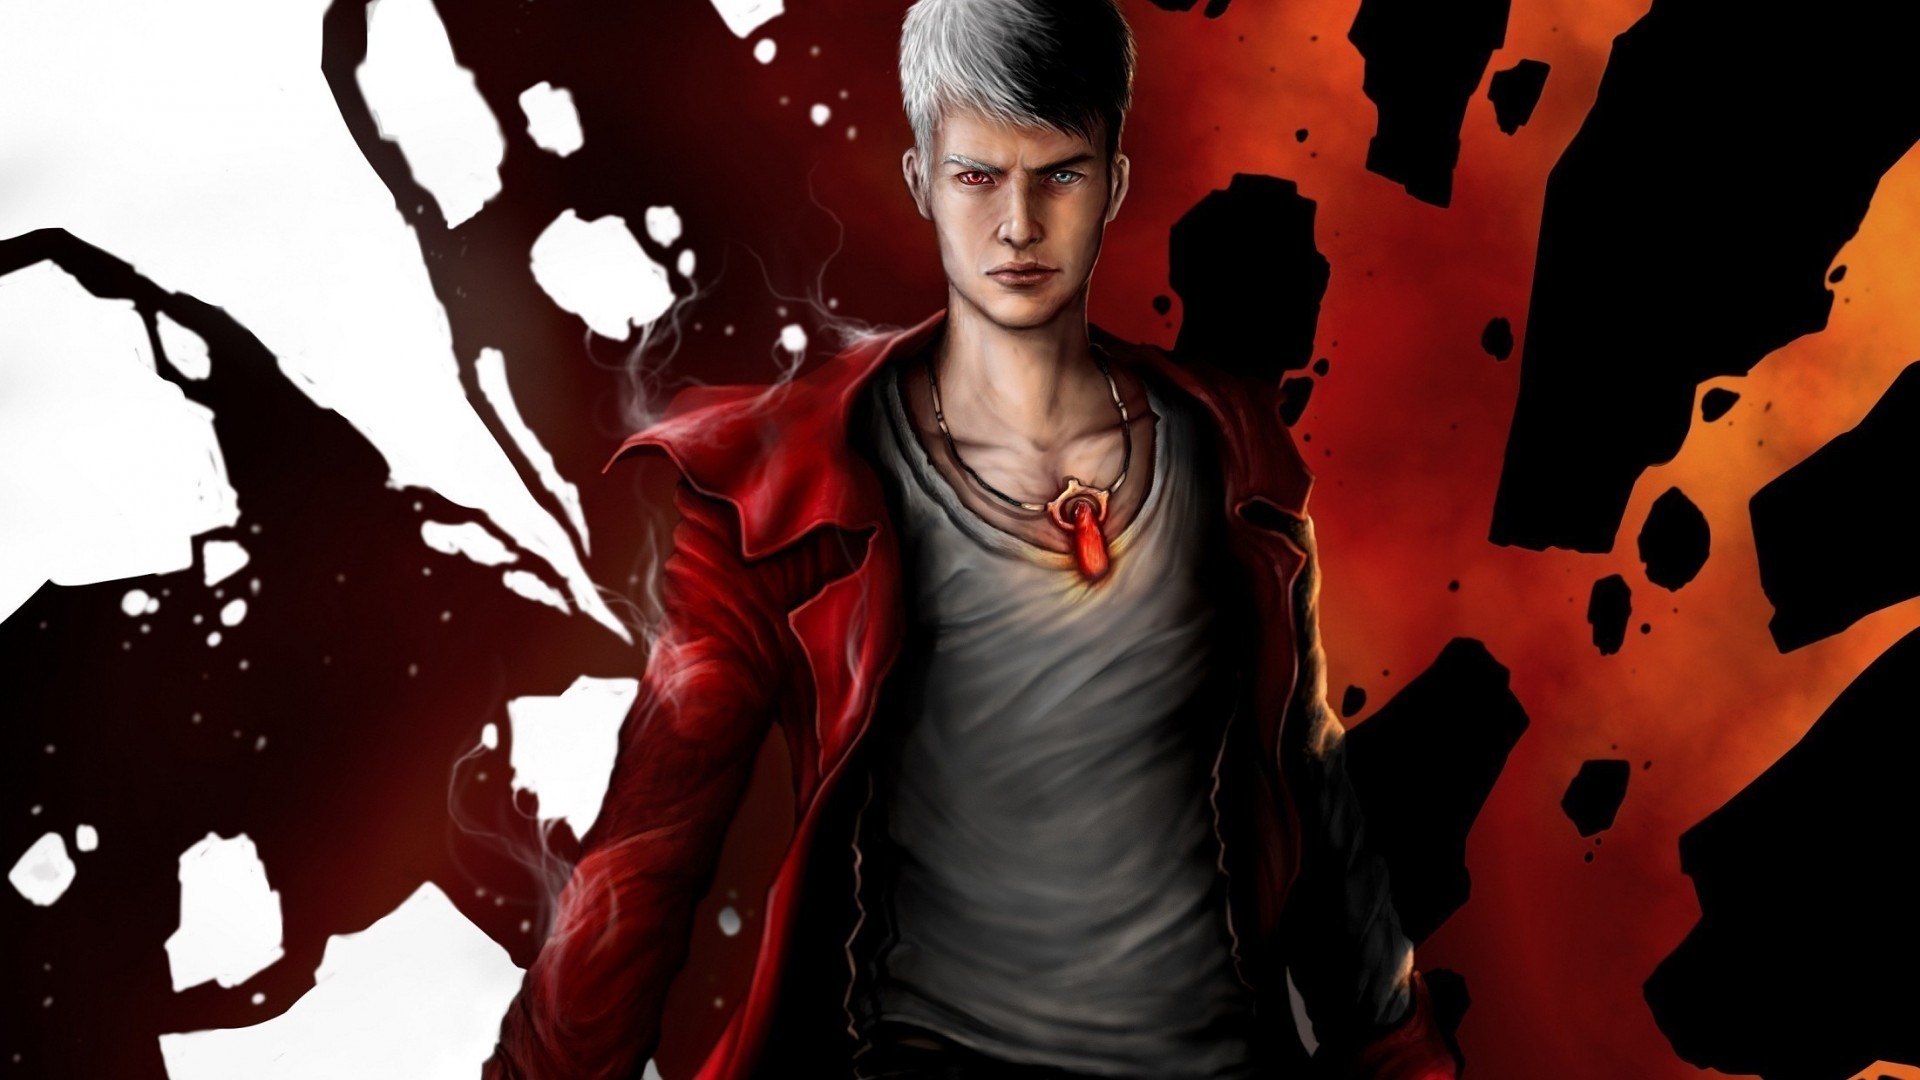 Dante Devil May Cry for 1920 x 1080 HDTV 1080p resolution